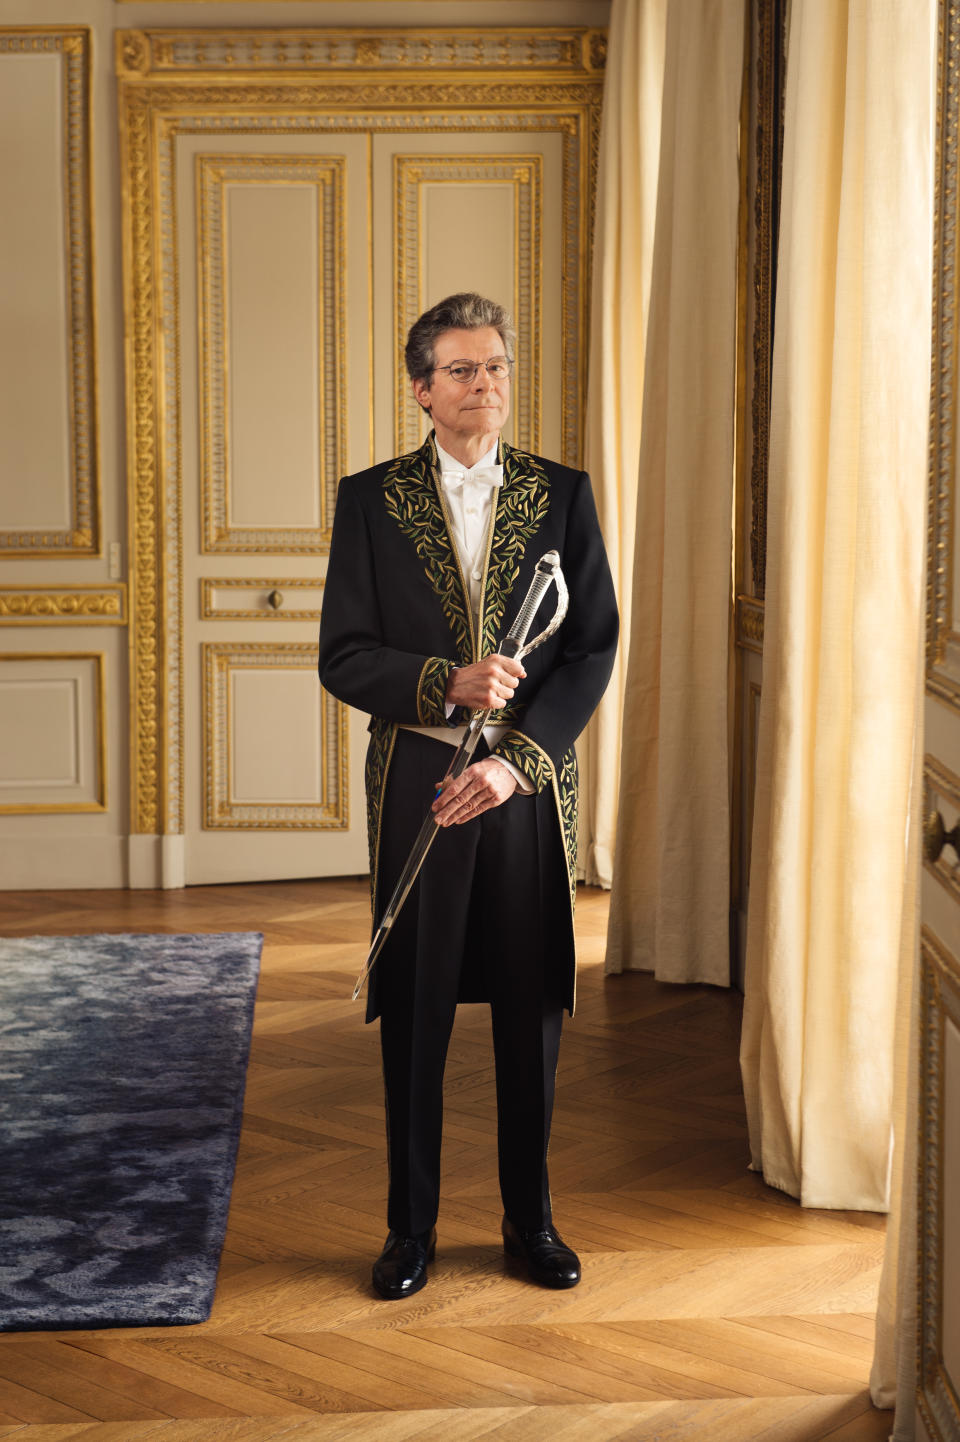 Antoine Compagnon stands in an opulent room with gold molding wearing ceremonial garb by Balenciaga.